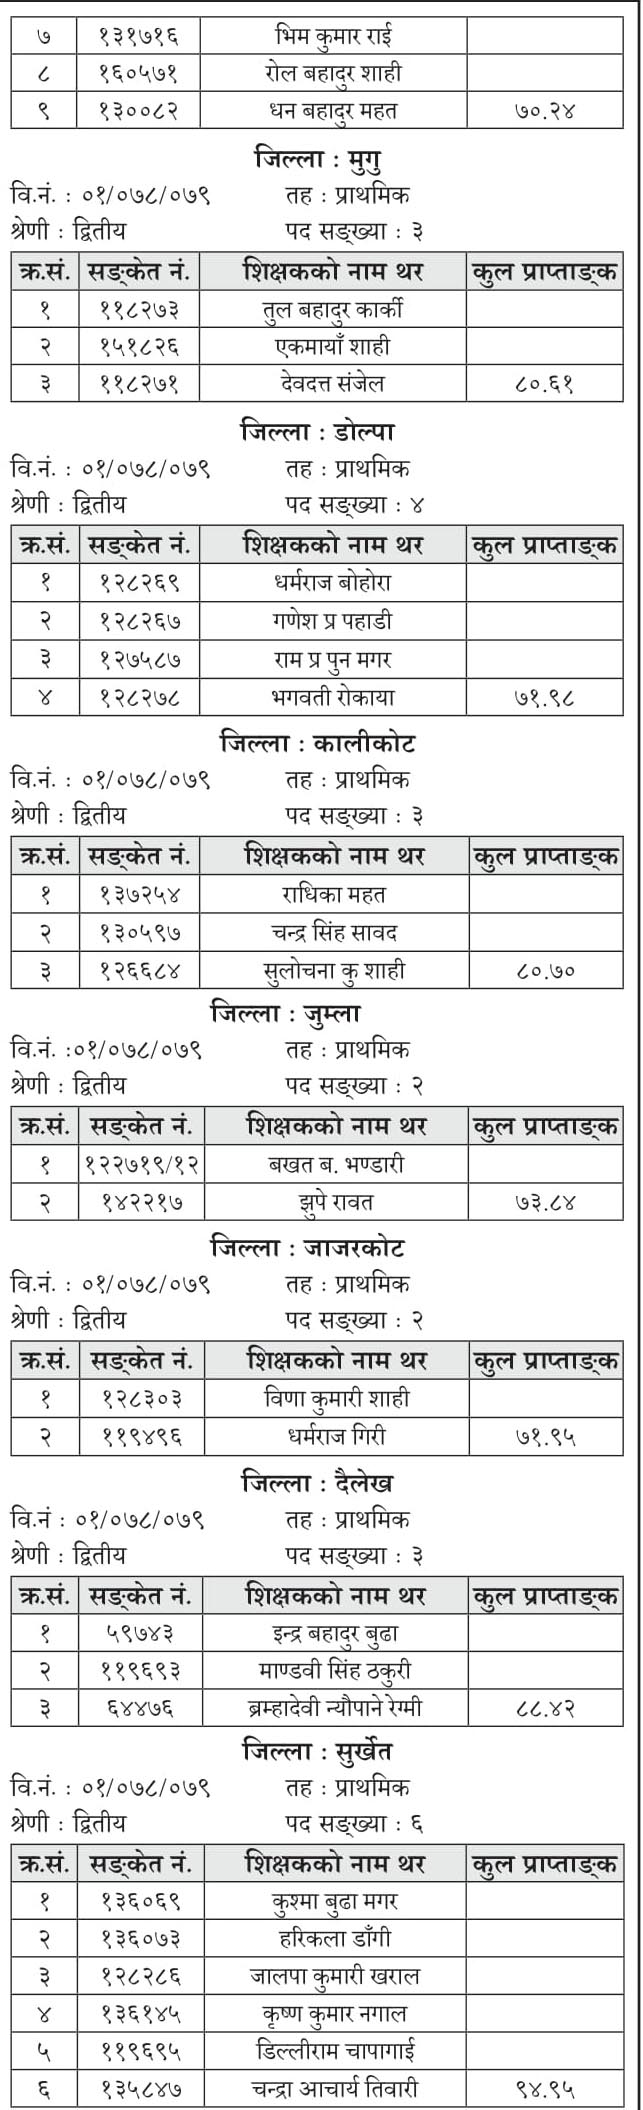 According to the decision of the Secretariat of the Teachers Service Commission Promotion Recommendation Committee, Directorate of Education Development, Karnali Province, Birendranagar, Surkhet, among the candidates who have received applications for promotion, according to Rule 33 of Paragraph 4 of the Teachers Service Commission Regulations 2057 (with amendments), the following district-wise The promotion list of candidates has been published.